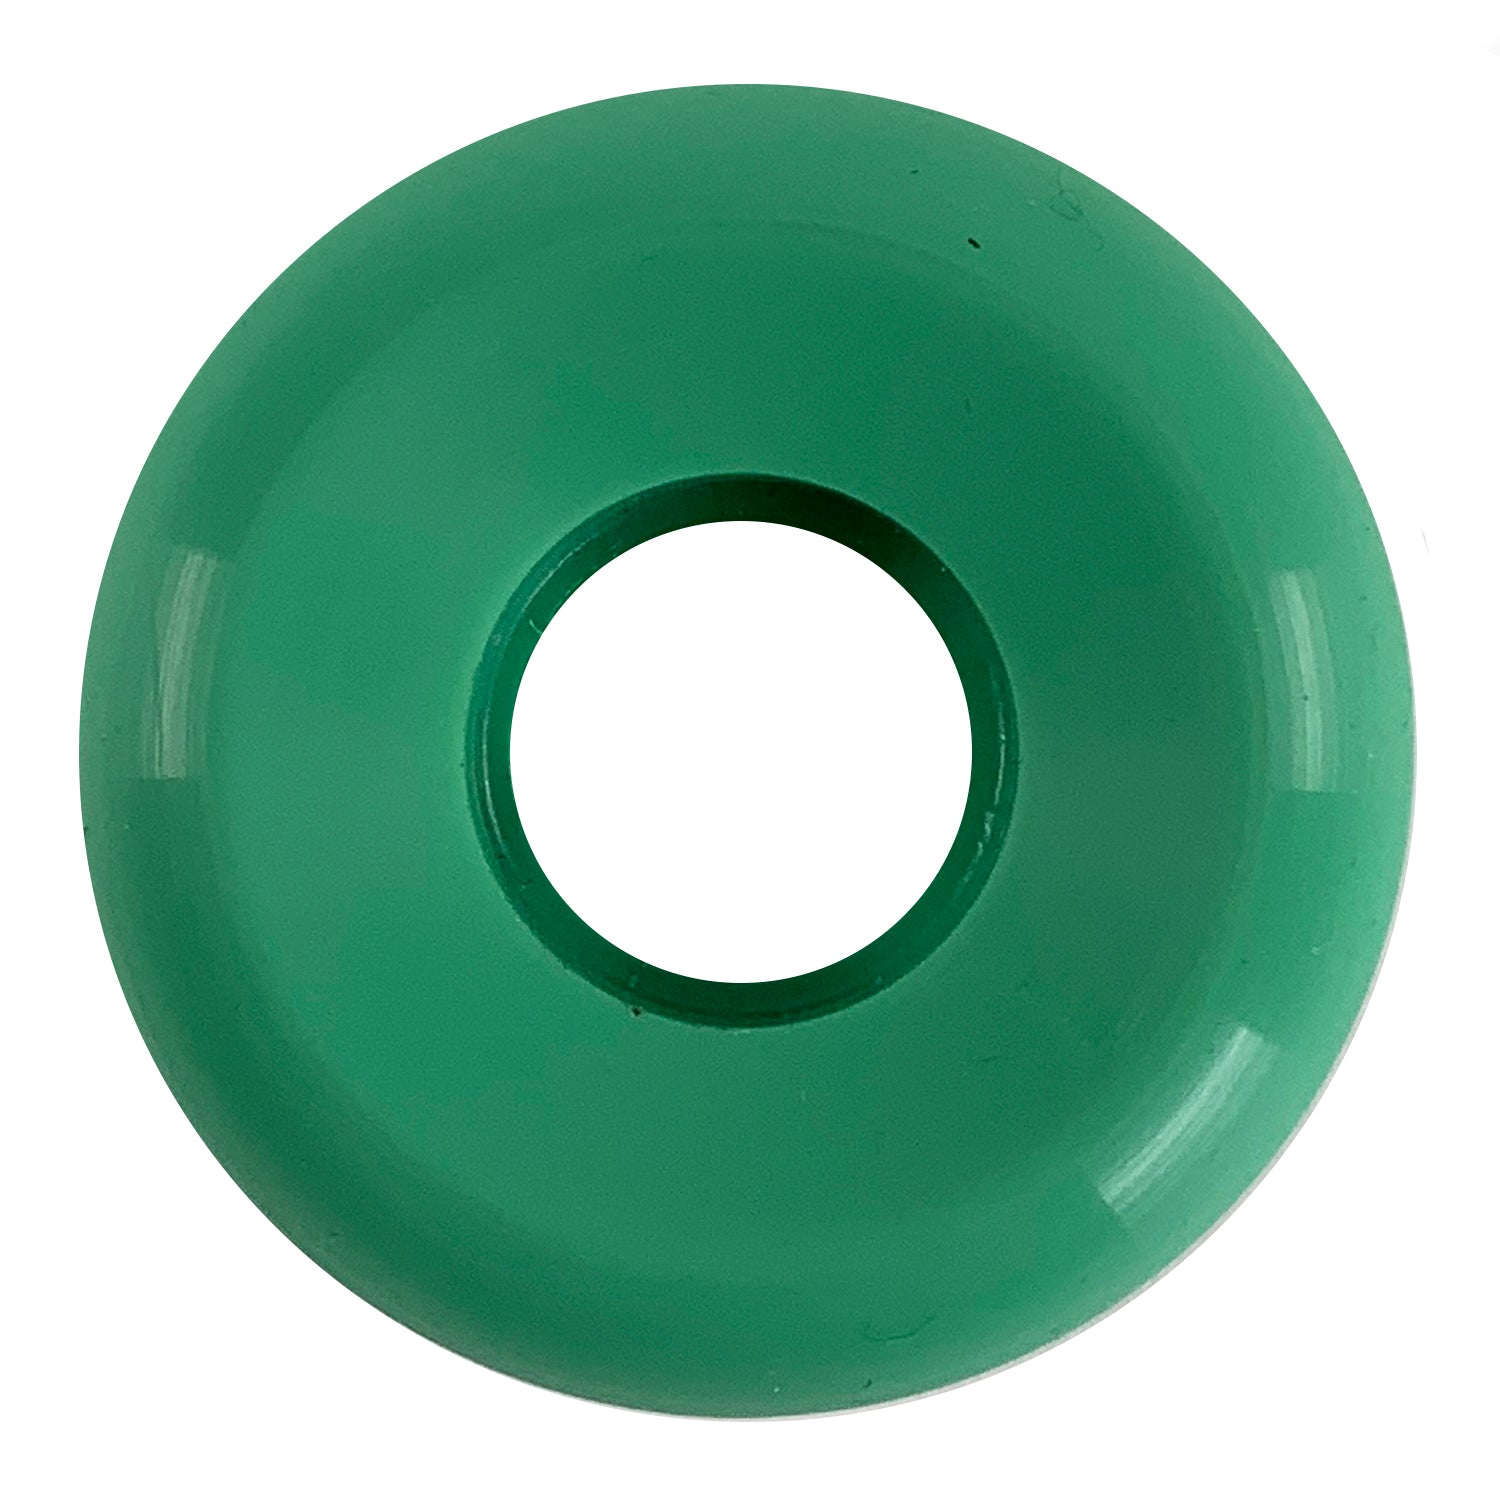 Orbs - 54mm - Specters Solids 99a - Mint - Prime Delux Store